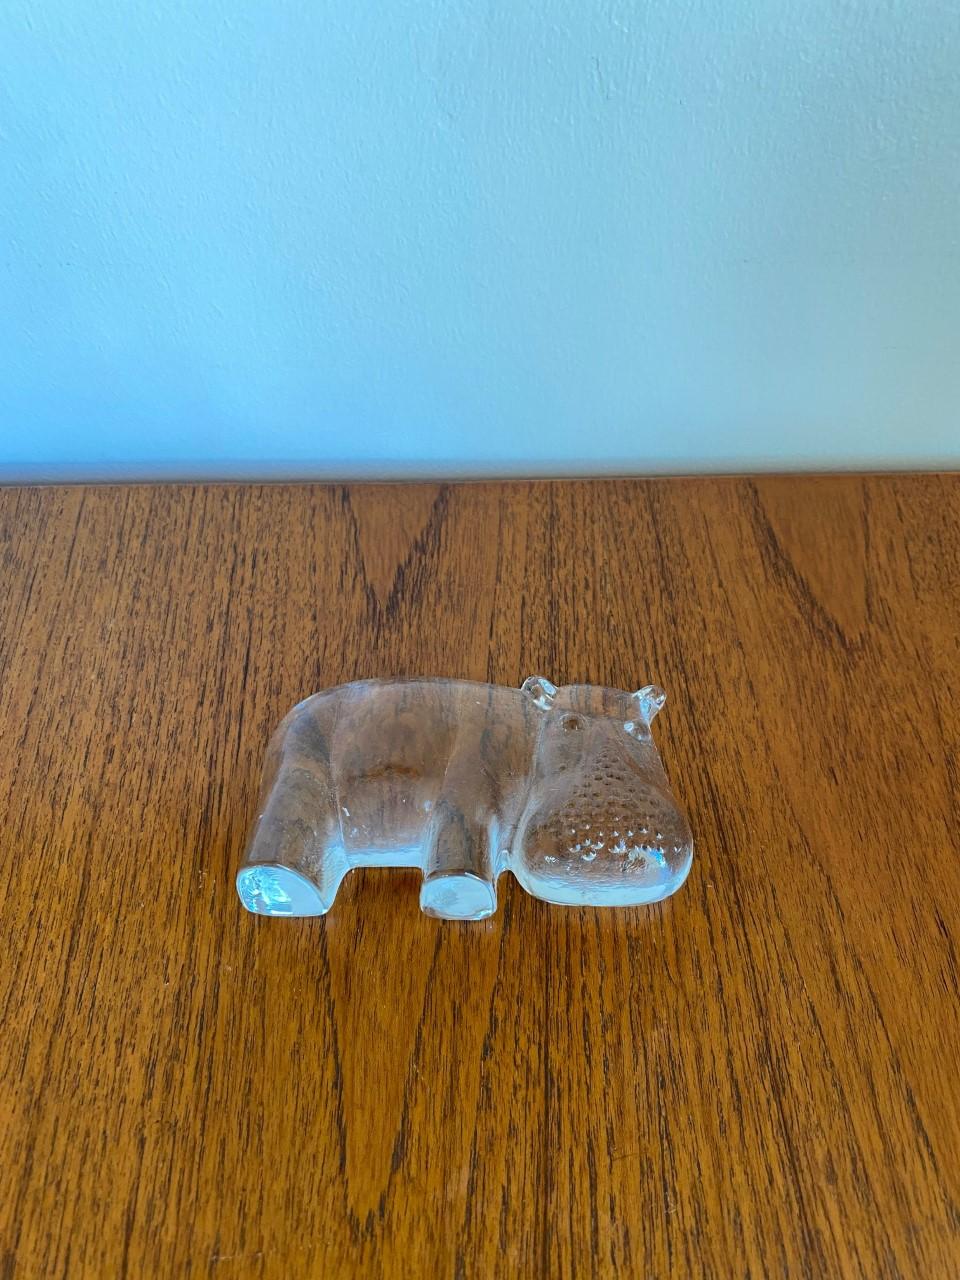 Beautiful clear glass hippopotamus paperweight by the Viking Glass Company. The glass figurine is flat on the back side, this allows the figure to stand on its own, be able to set flat against the wall, or lay flat. Perfect as a paperweight or as a